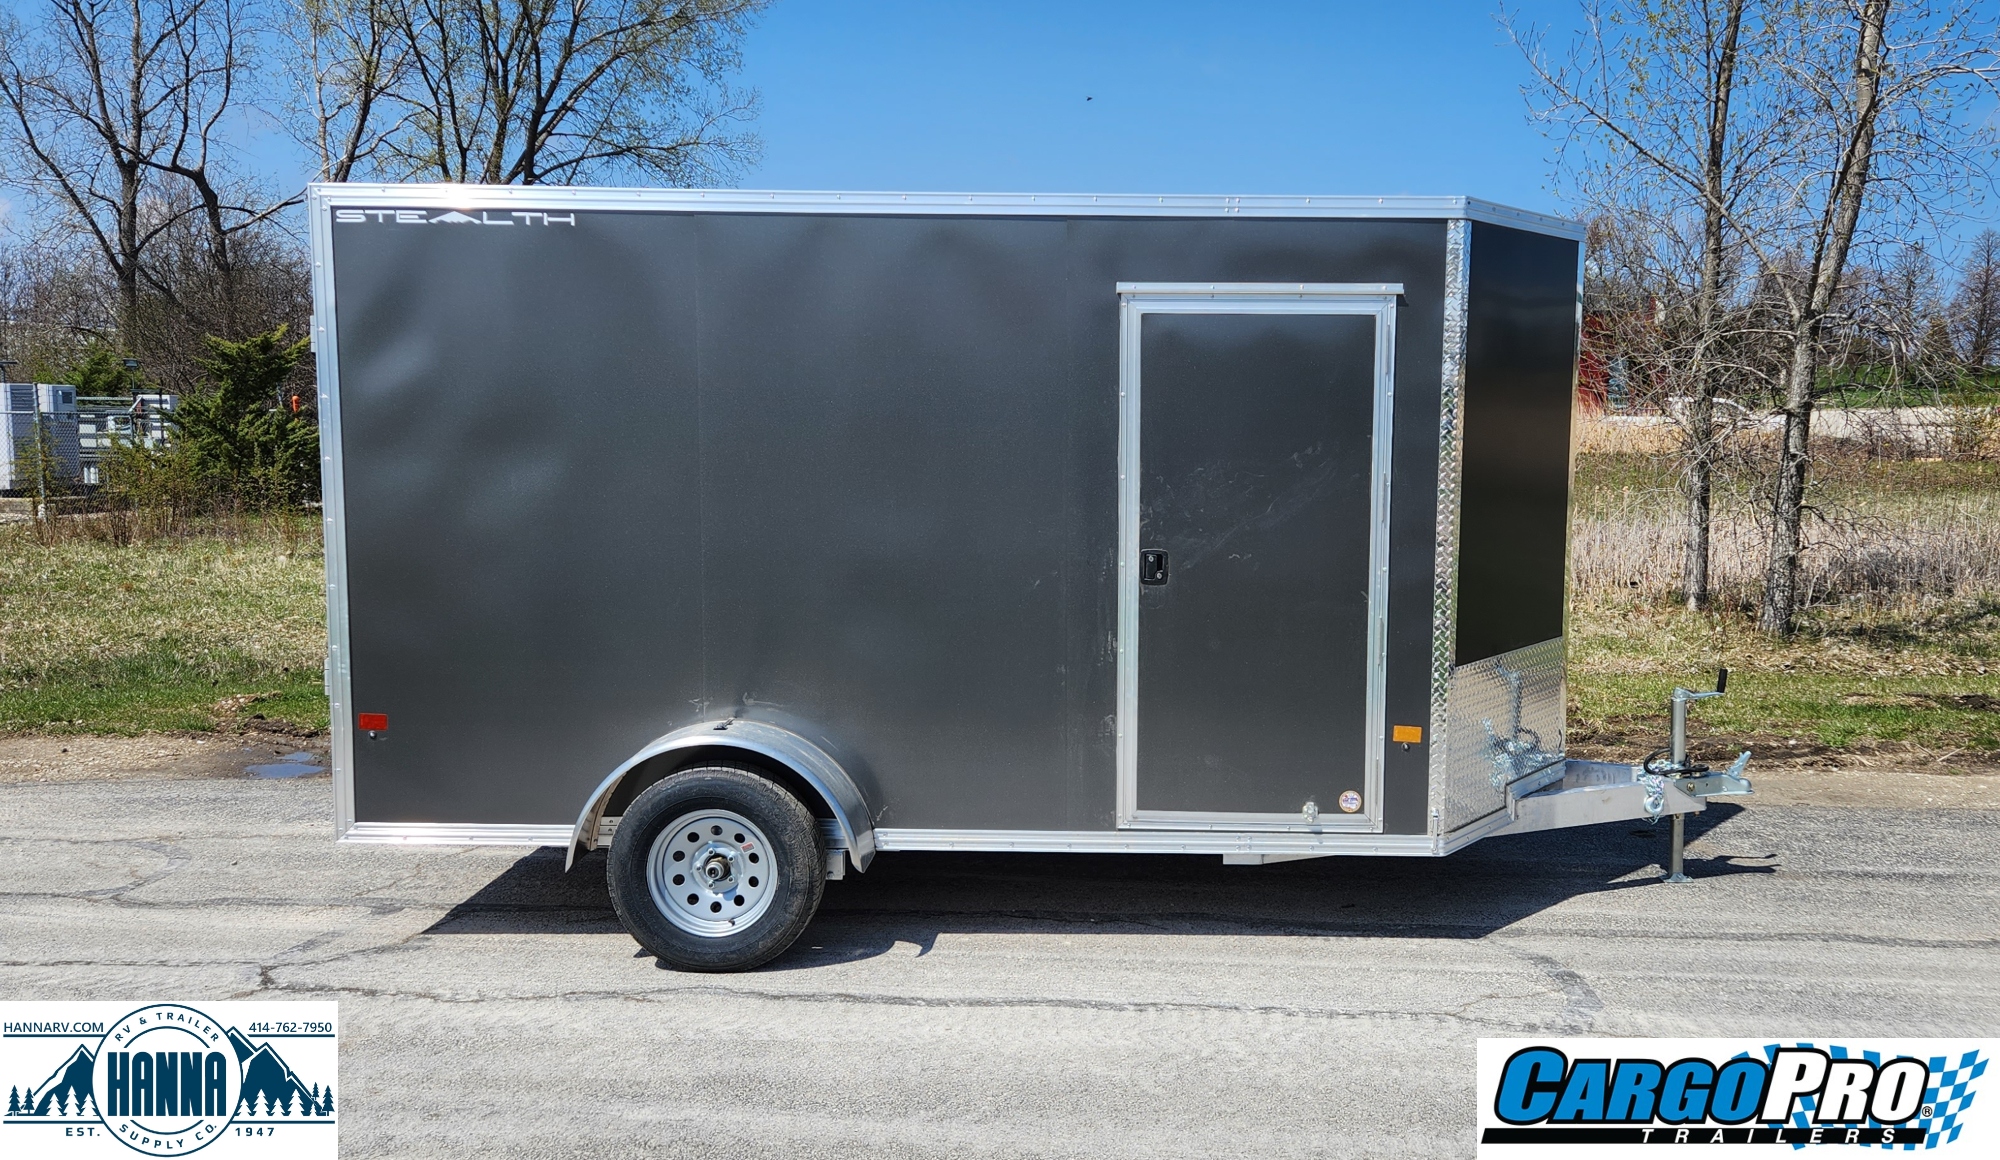 CargoPro Stealth 6x12 Aluminum Frame Single Axle Cargo Trailer w/ Ramp Door & 6" Extra Height - Charcoal